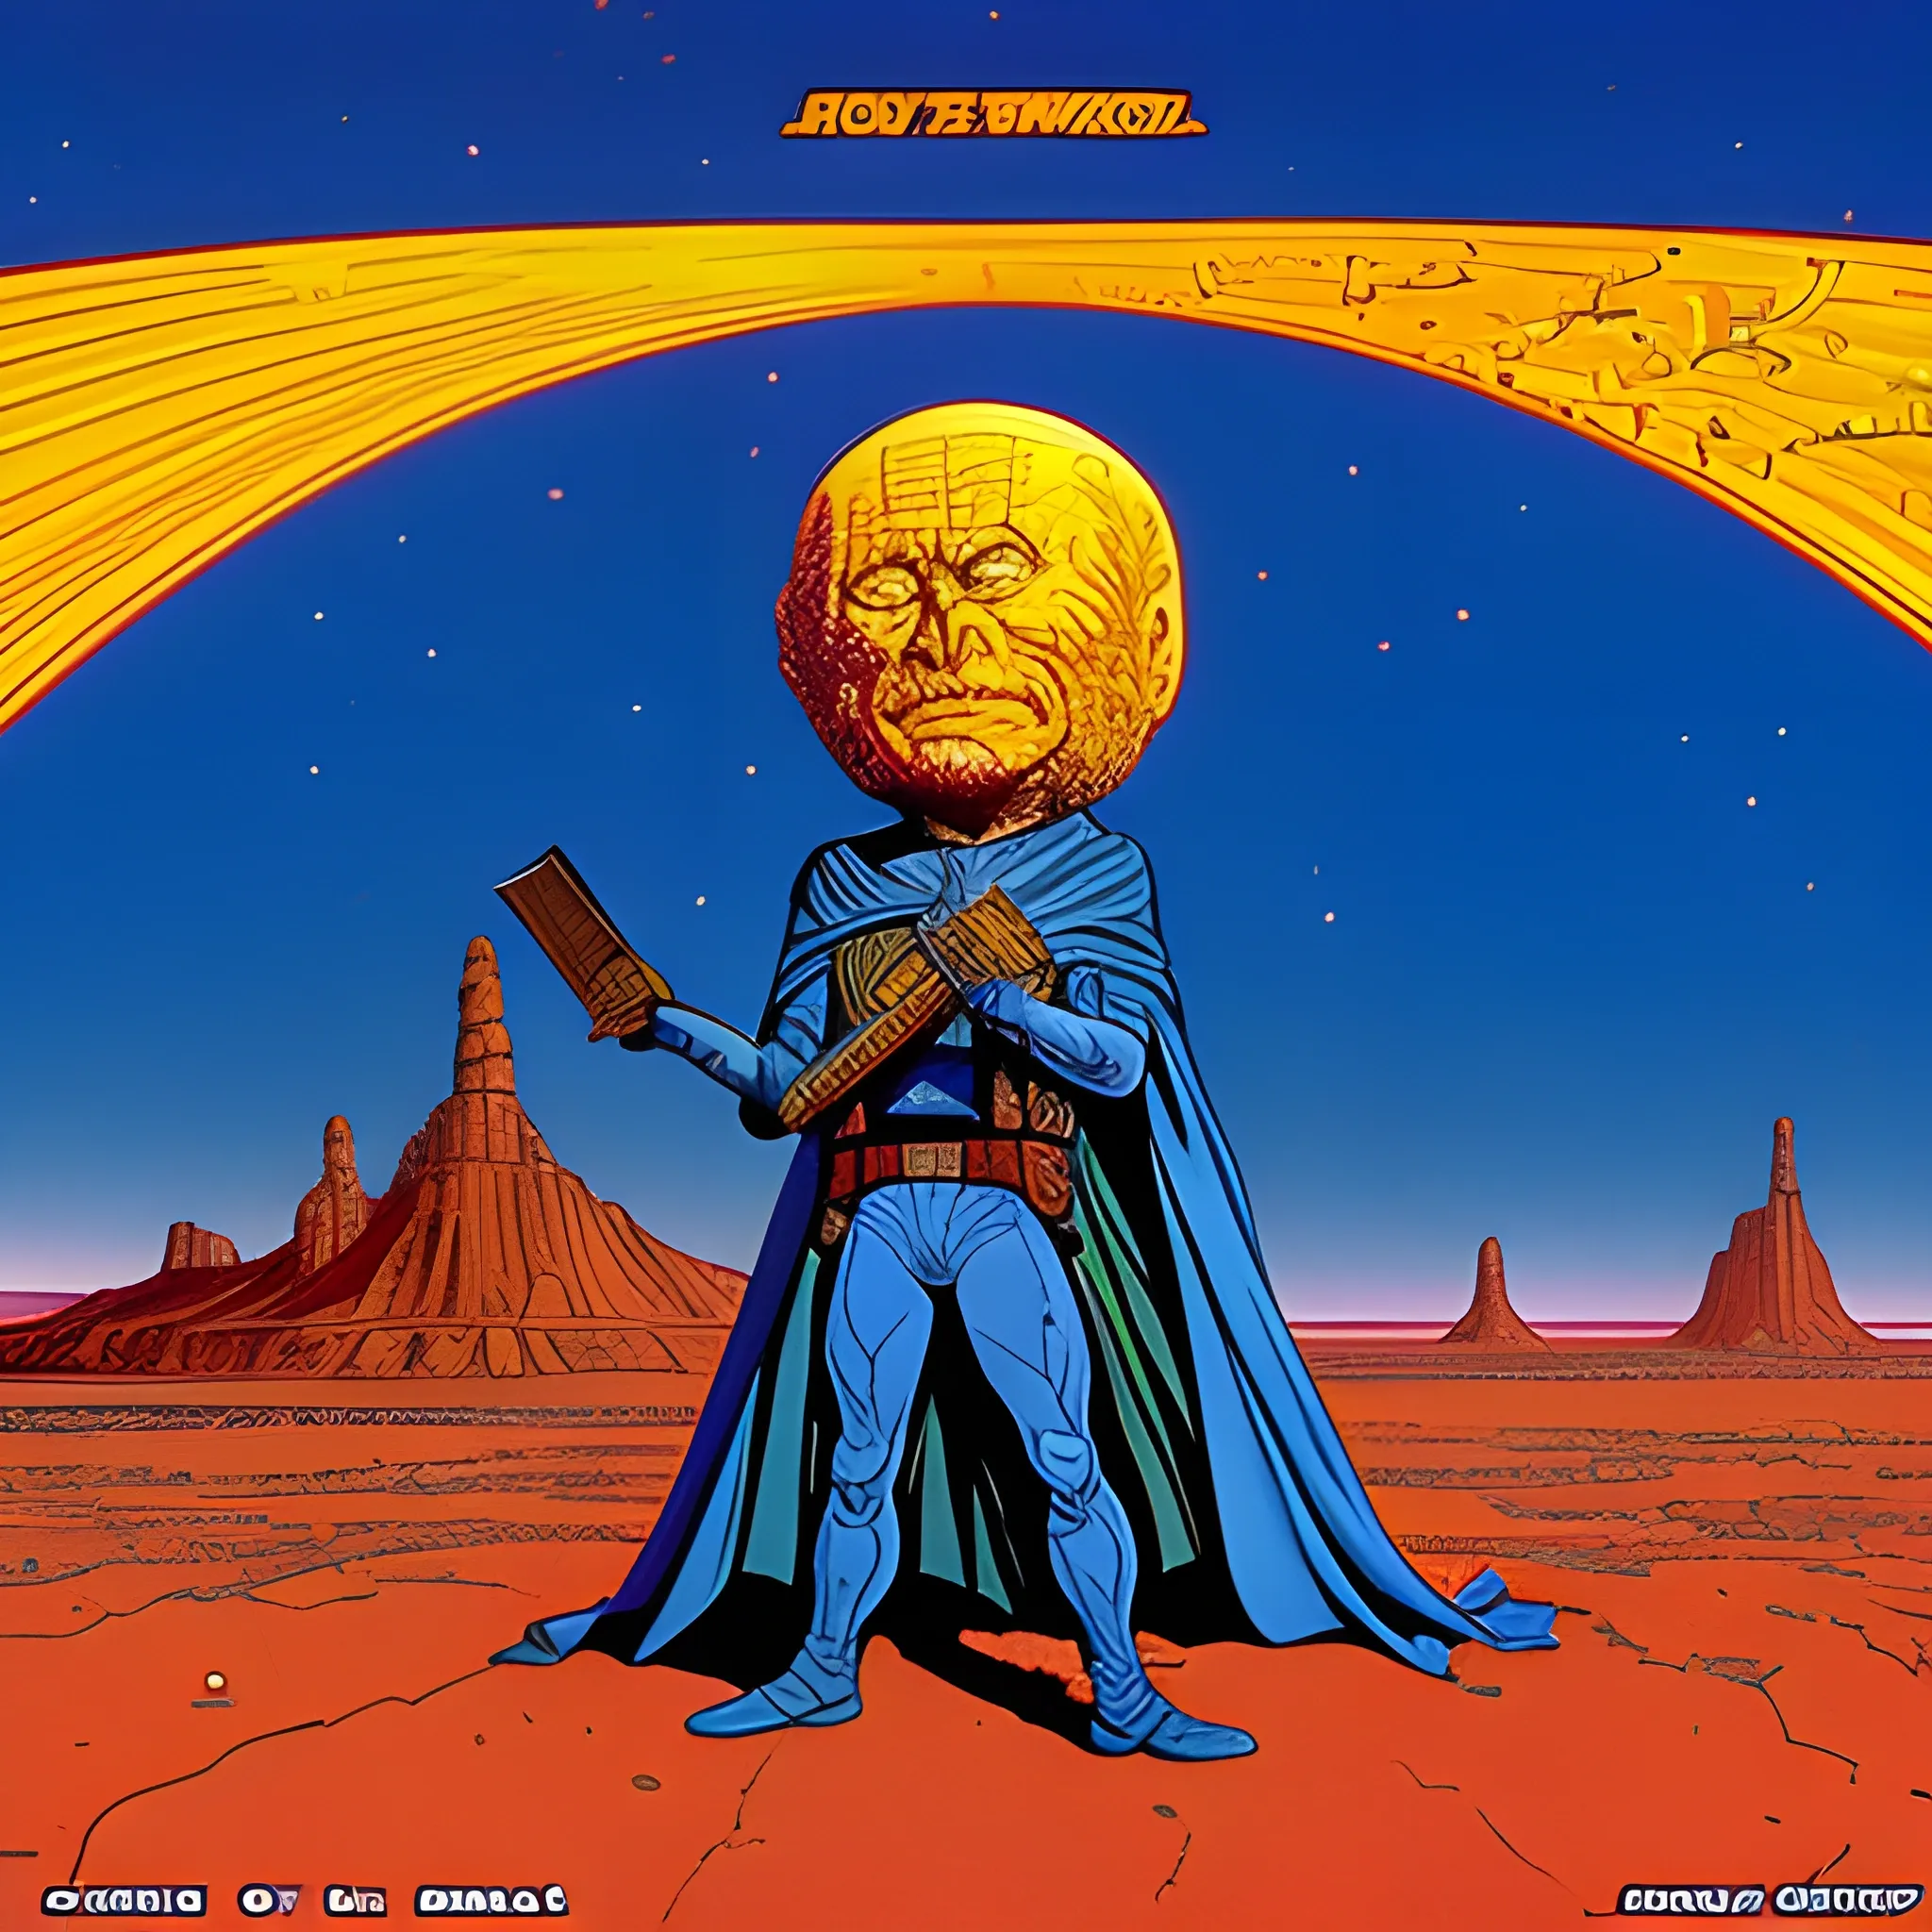 a scene from the book war of the world in jean giraud's art style